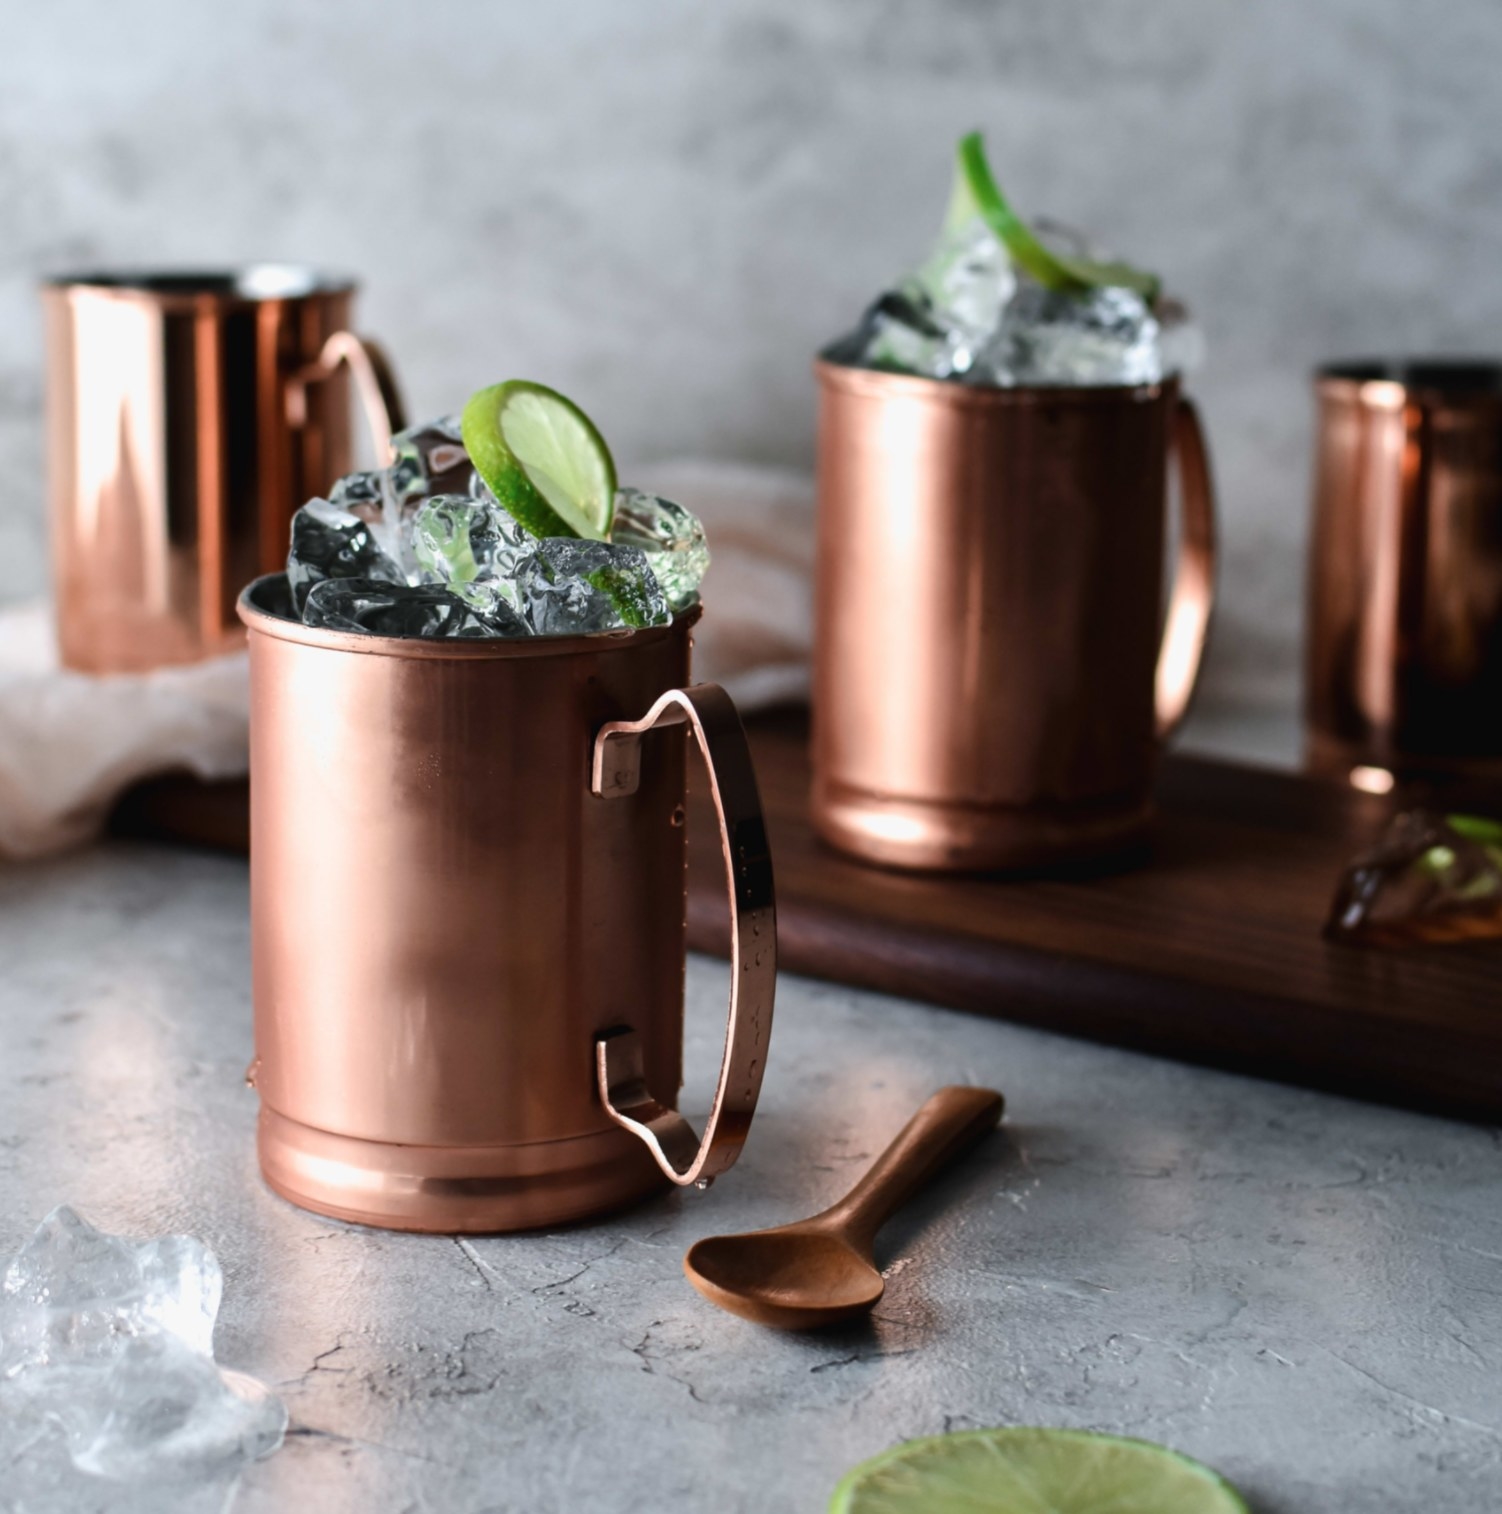 the copper mugs with ice and limes in them